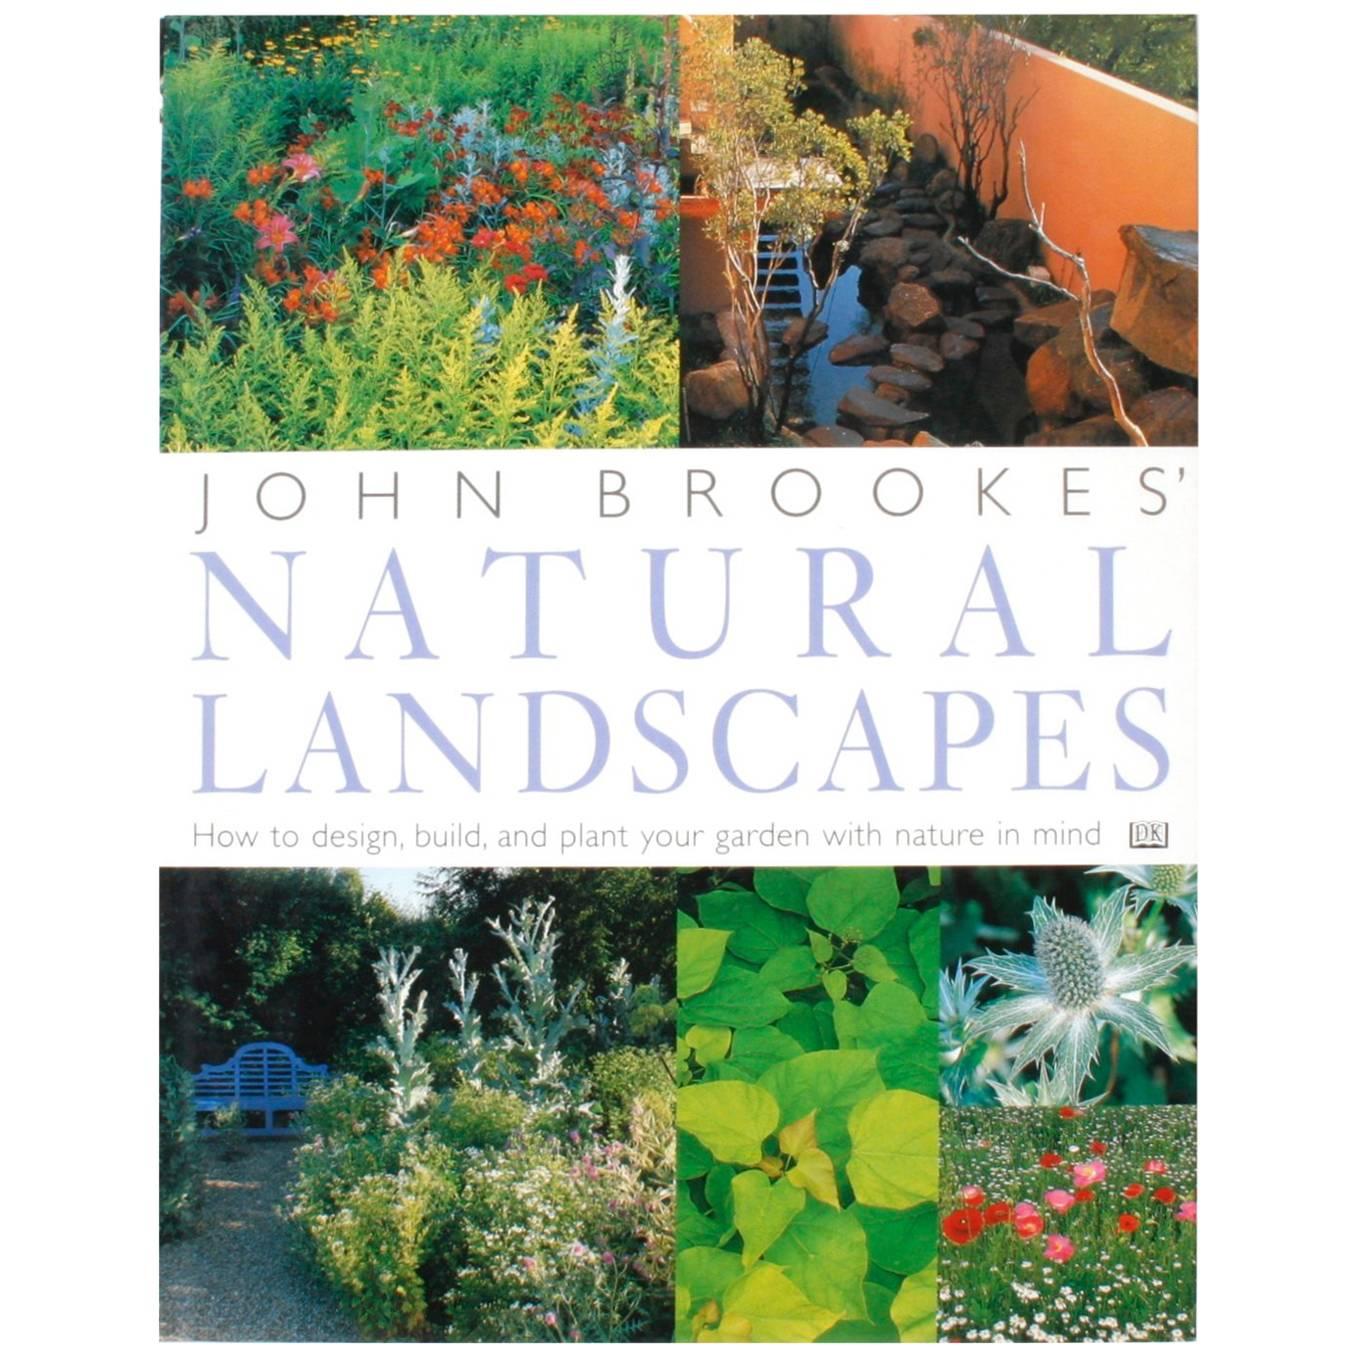 John Brookes' Natural Landscapes, First American Edition